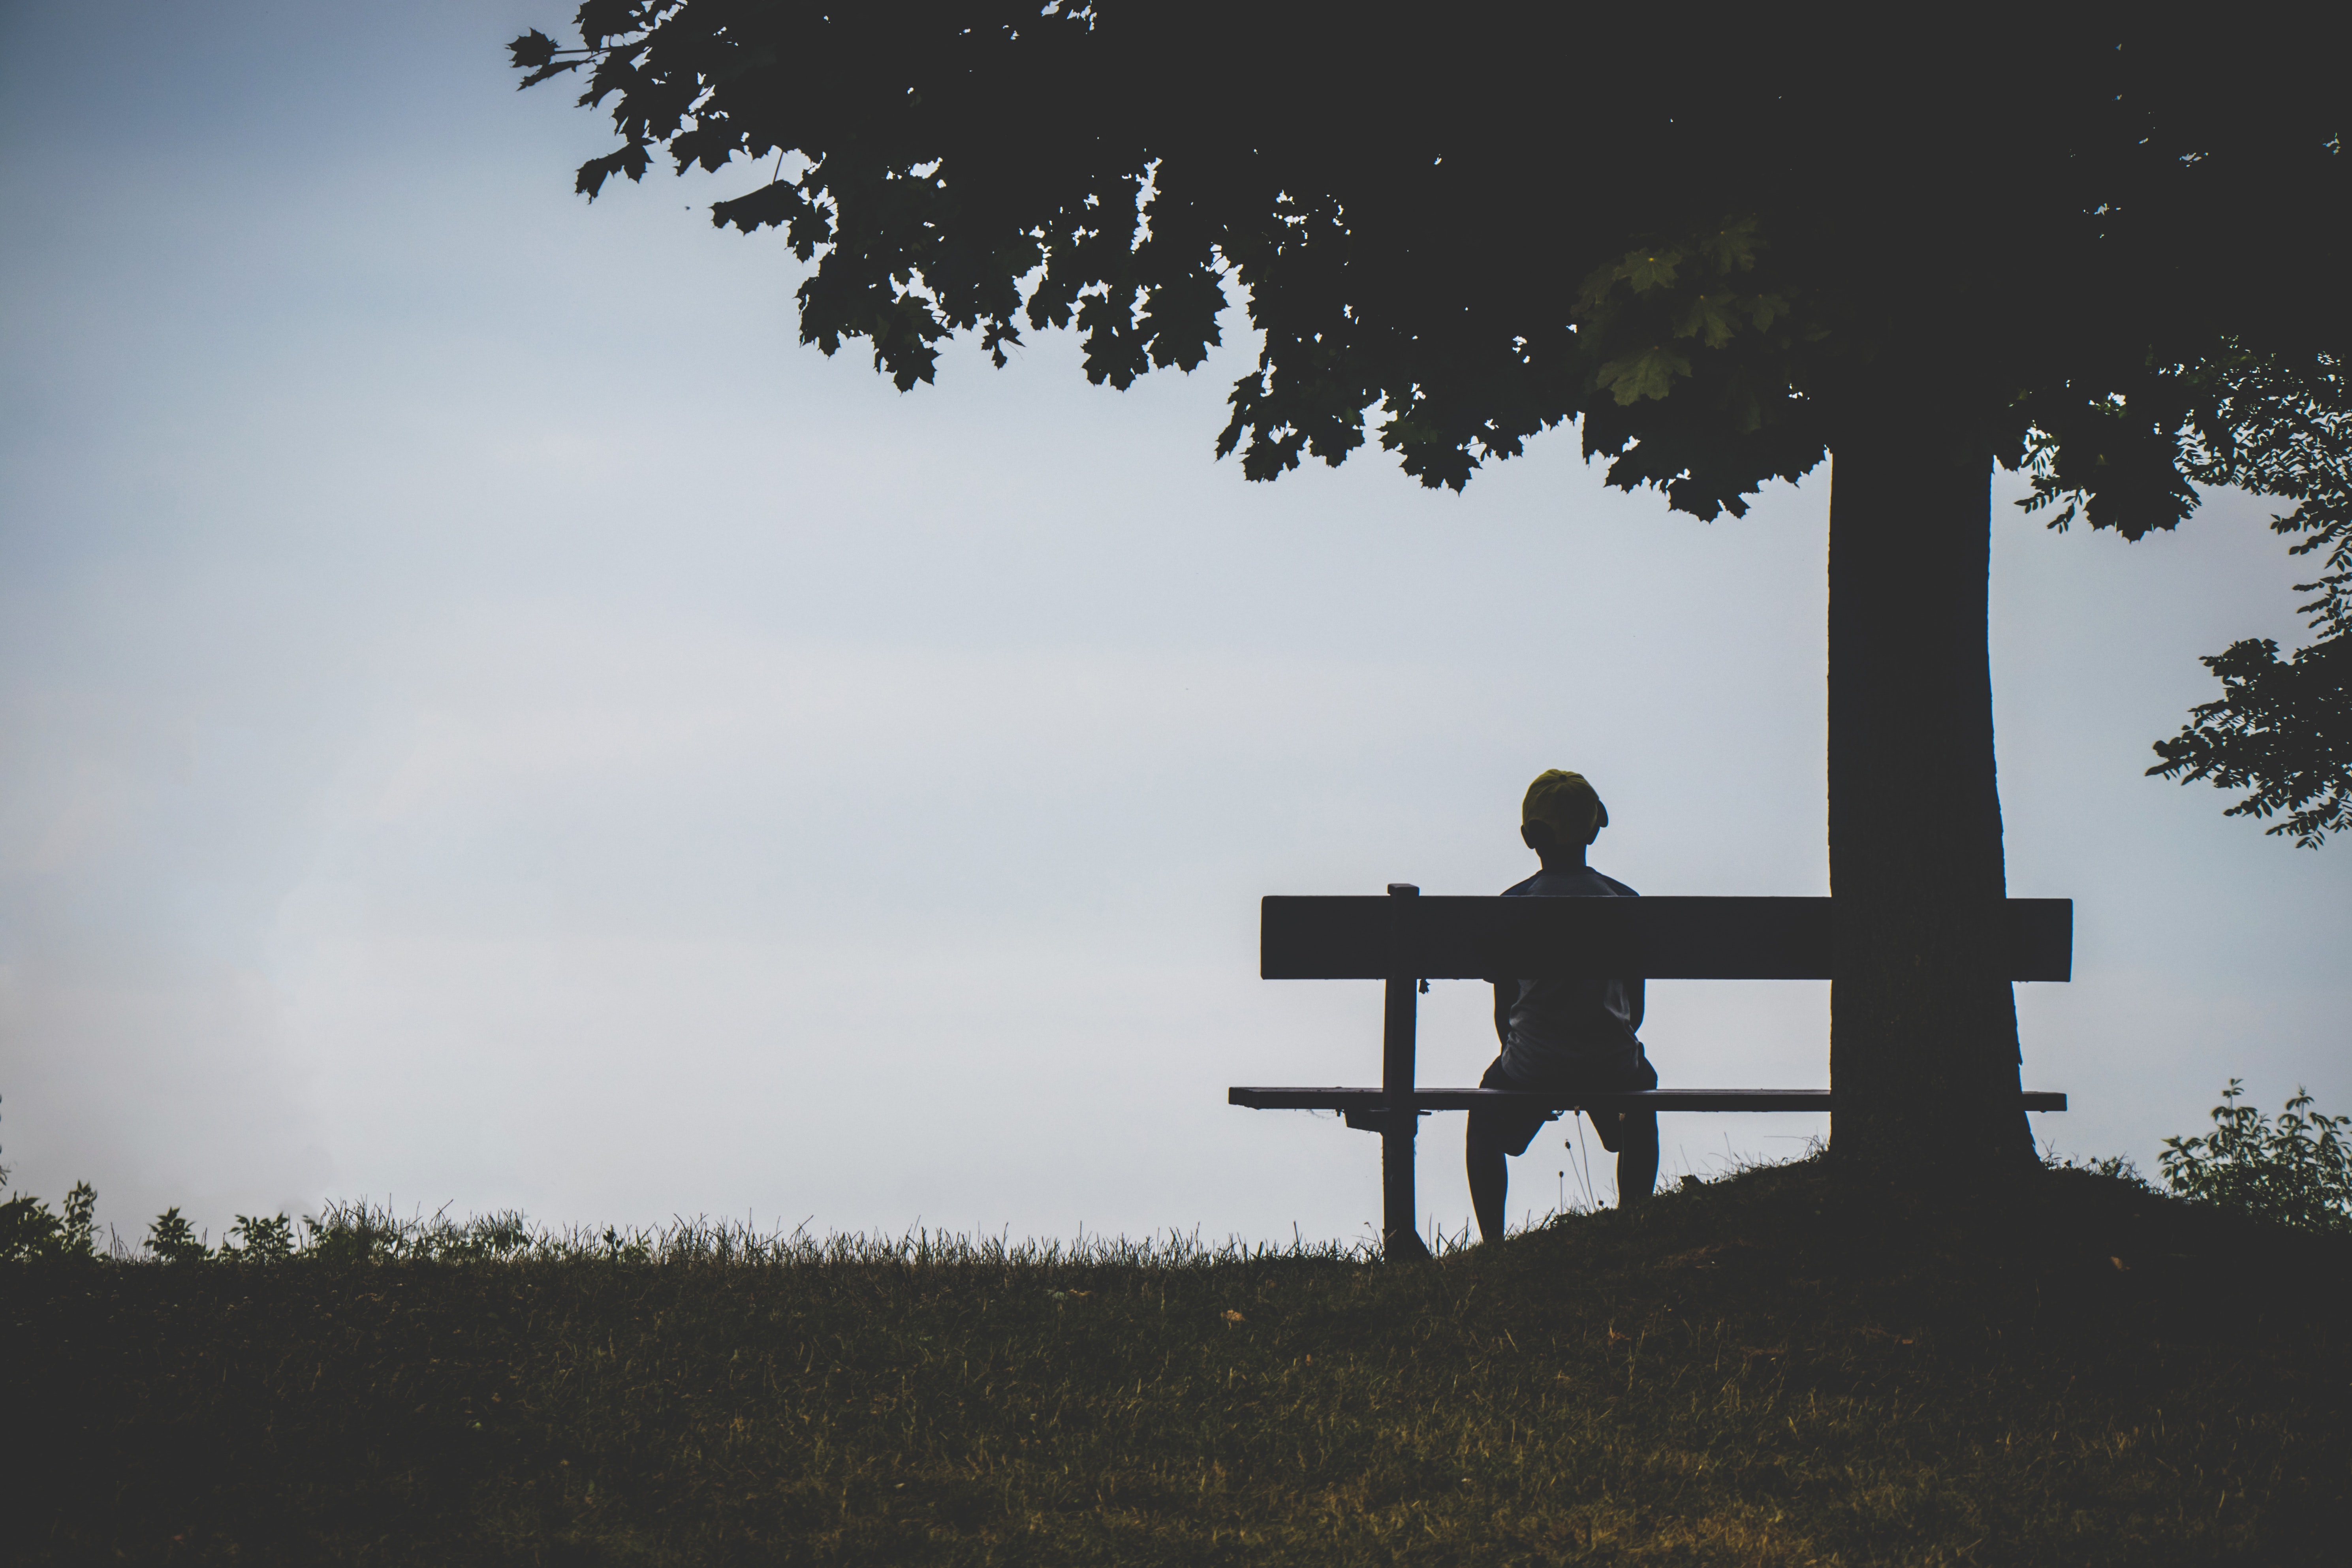 alone, privacy, loneliness, silhouette, seclusion, miscellanea, miscellaneous, bench, lonely, child 1080p